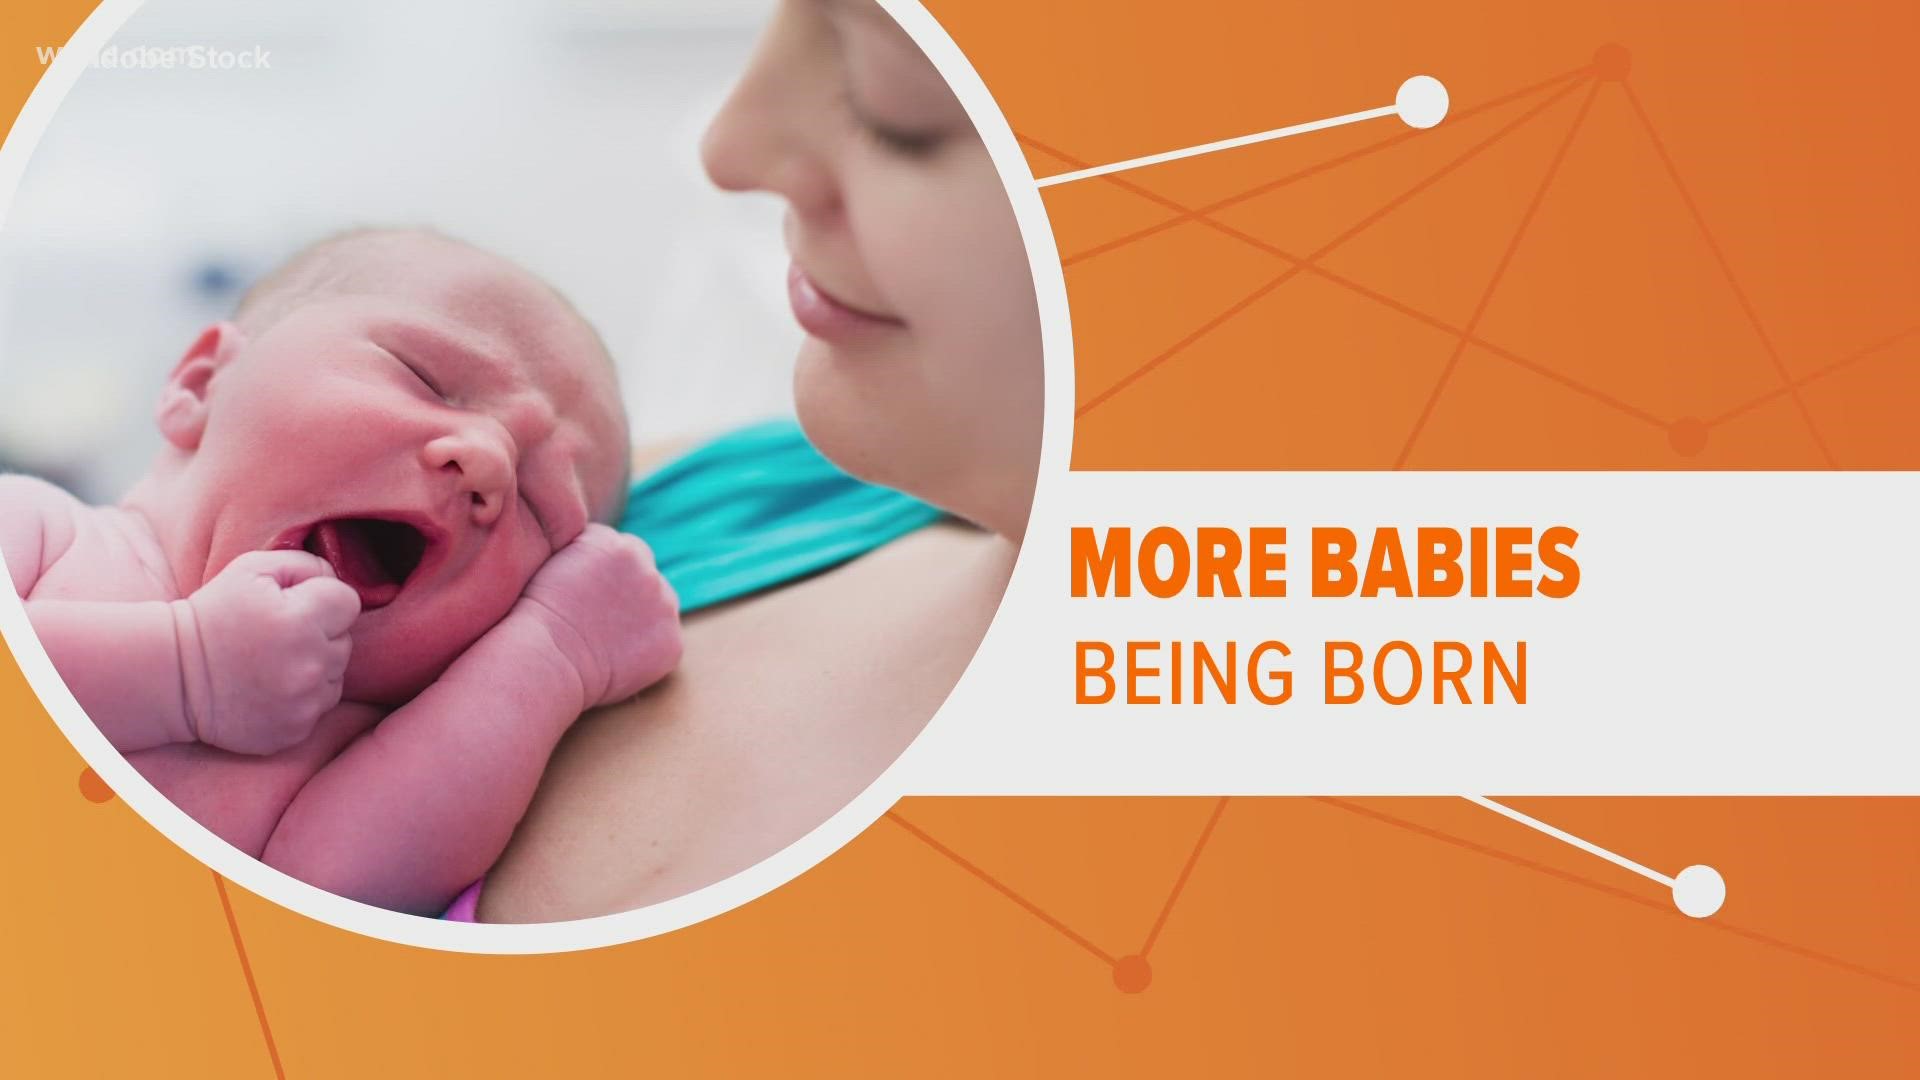 Experts were sure we'd see a baby boom during the COVID-19 pandemic. But birth rates were down in 2020. Now, there are signs the expected boom is happening in 2022.